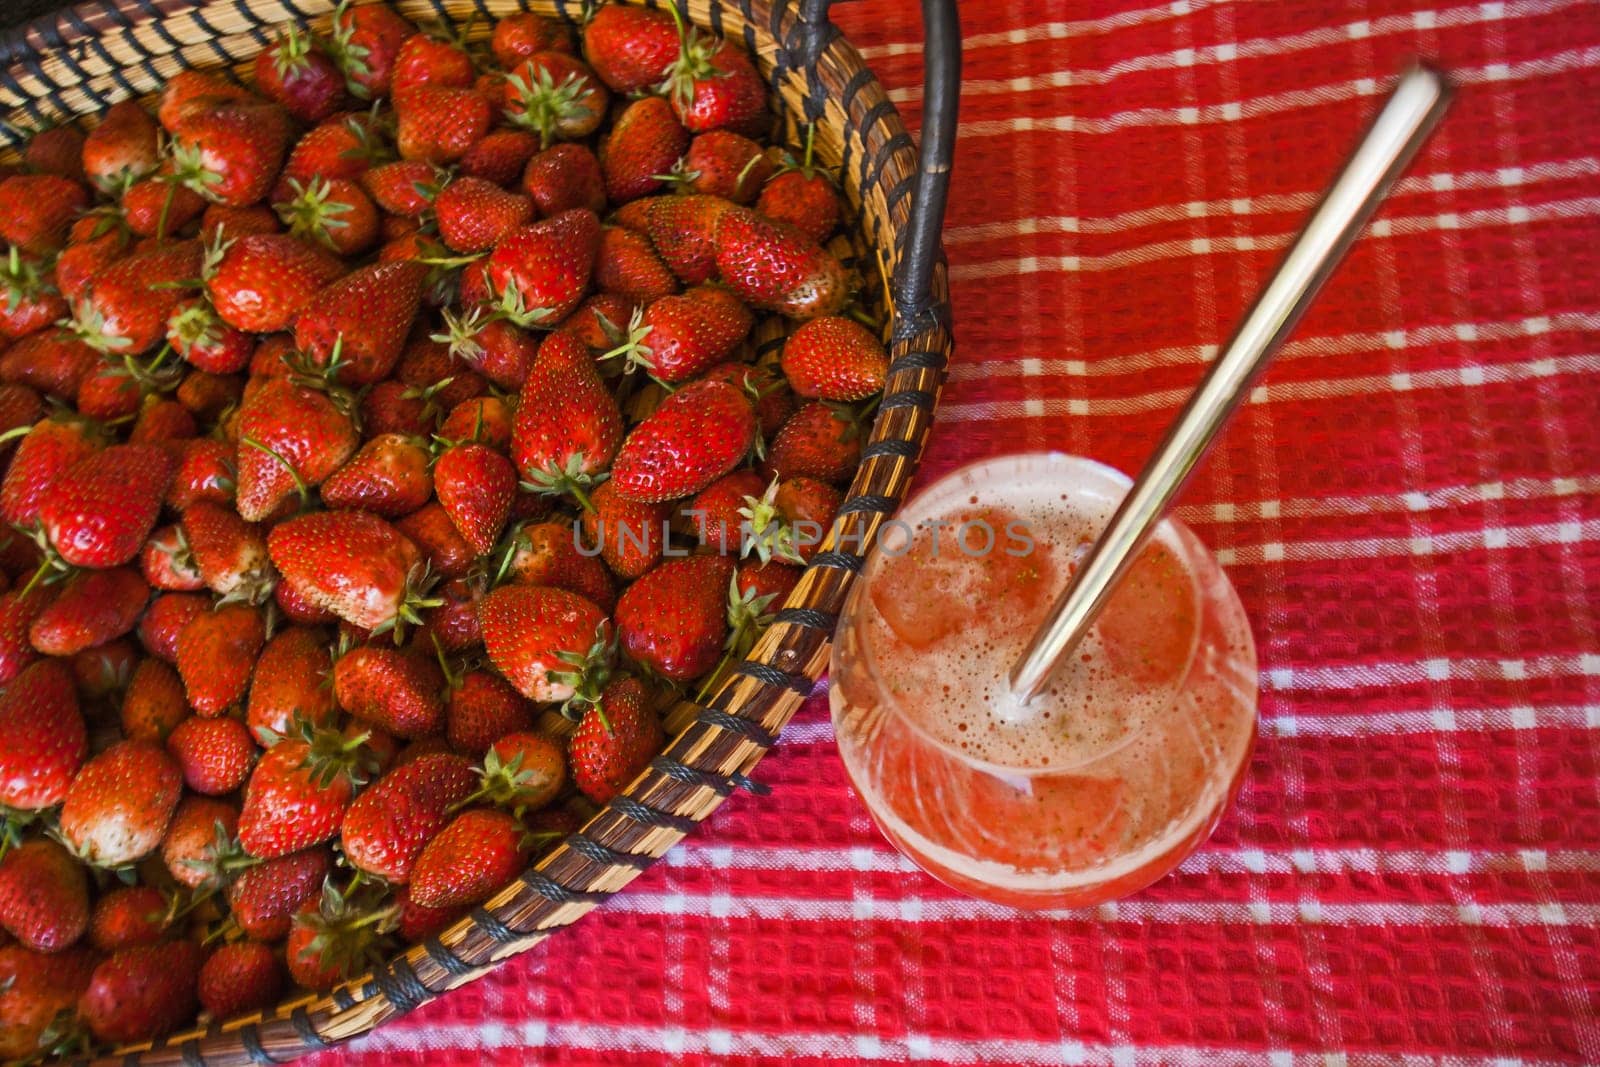 Strawberries and cocktail 14676 by kobus_peche